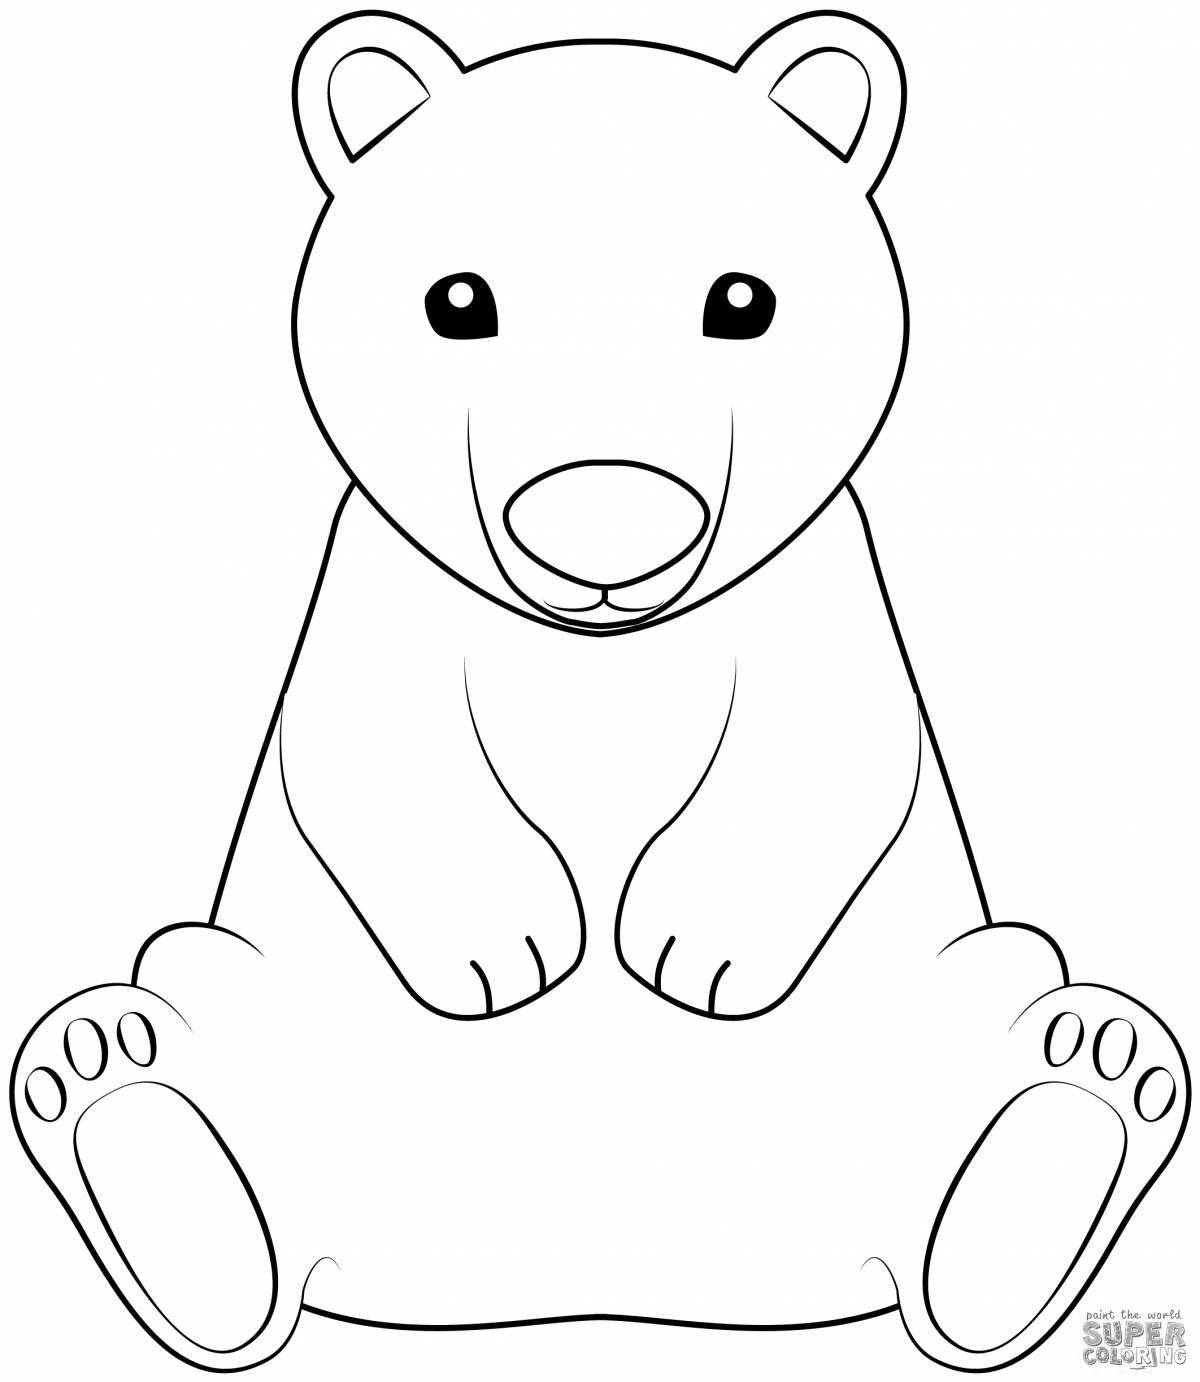 Colorful coloring bear for children 5-6 years old